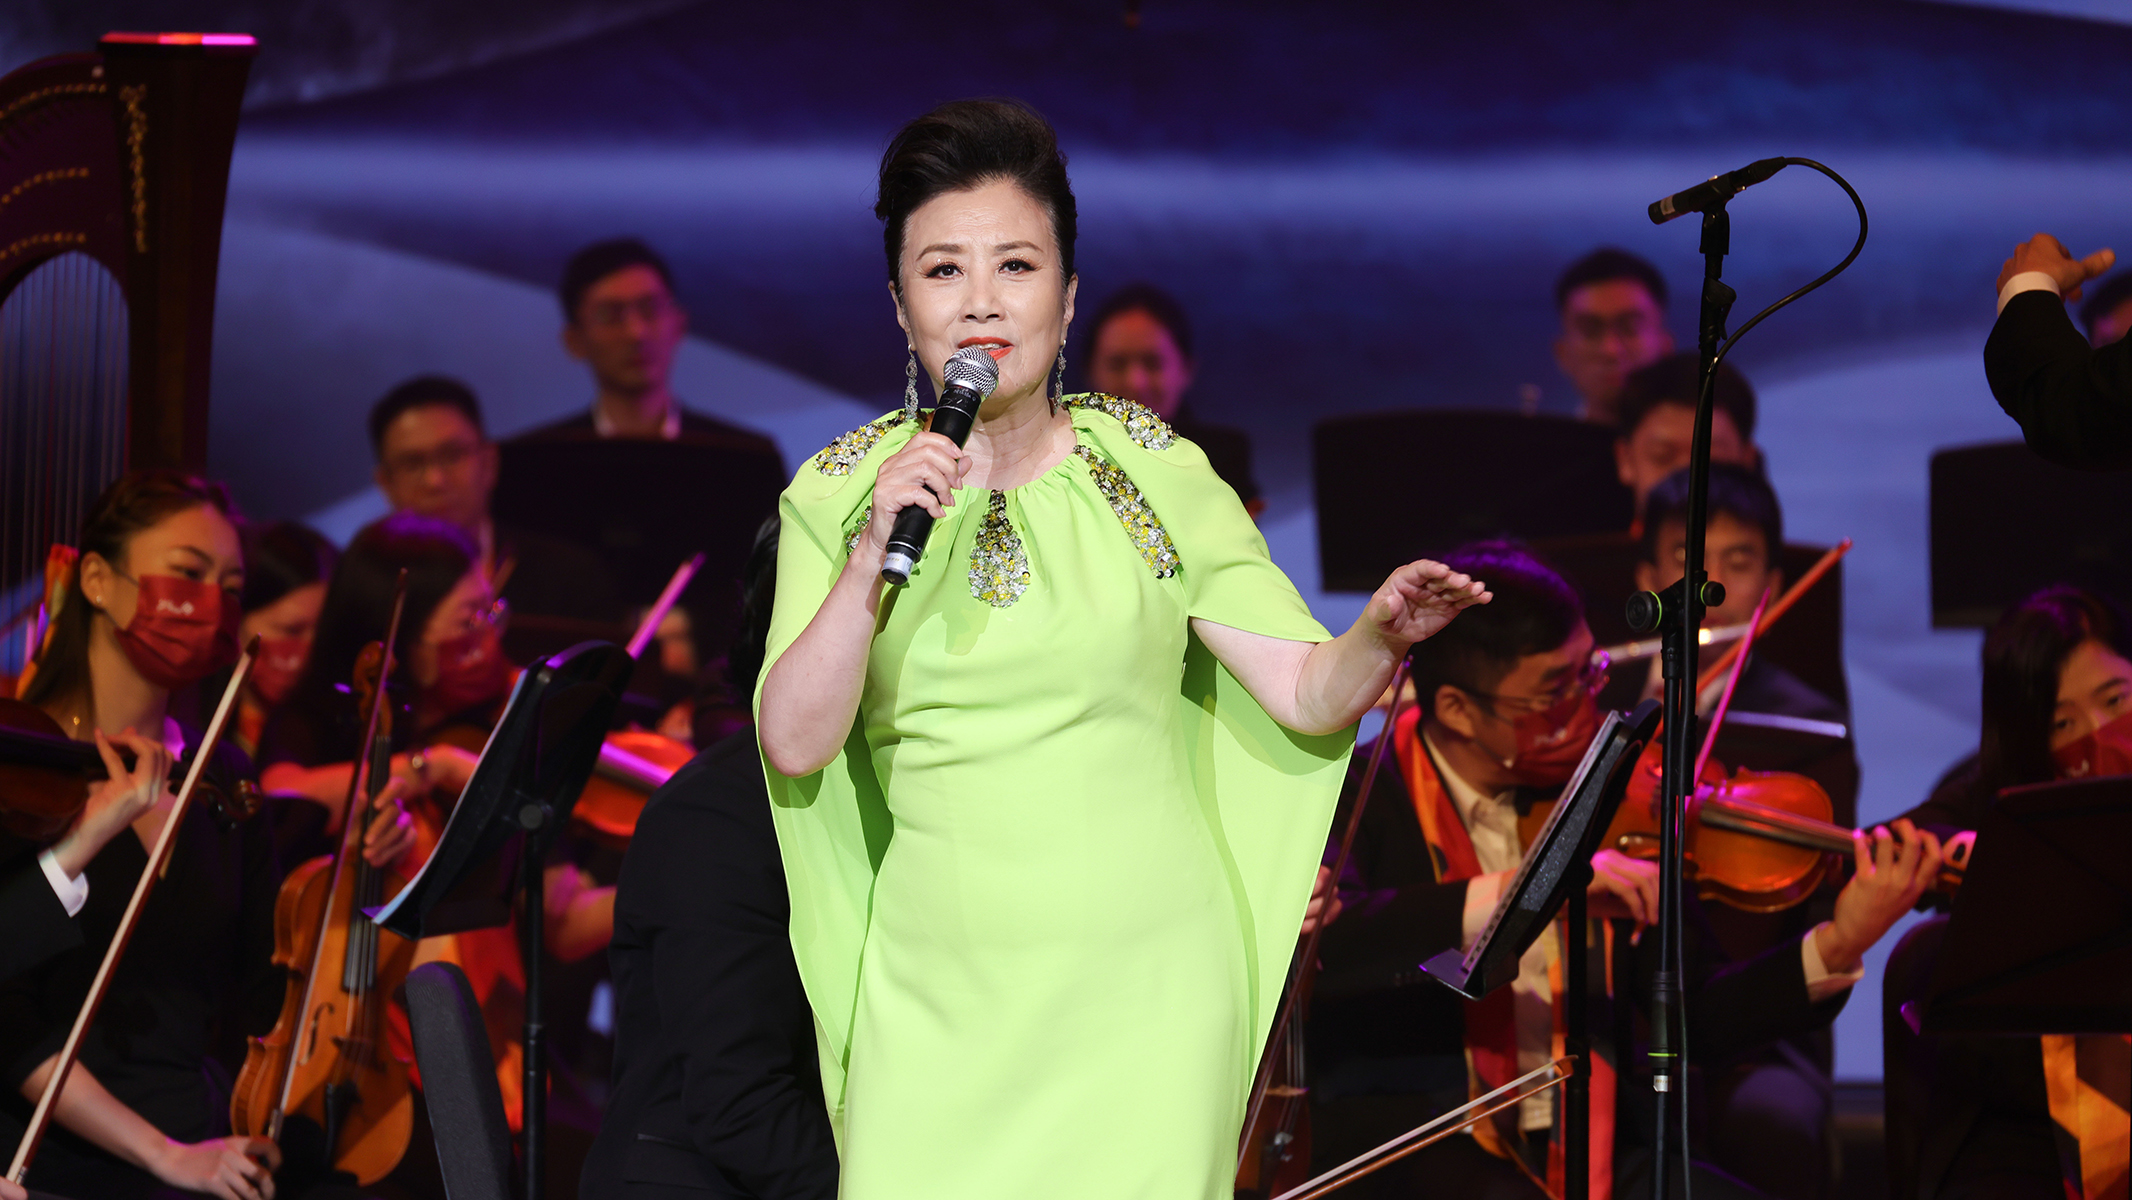 Renowned Hong Kong artist Dr Liza Wang sang the pop songs “Love and Passion” and “The Brave Chinese”.